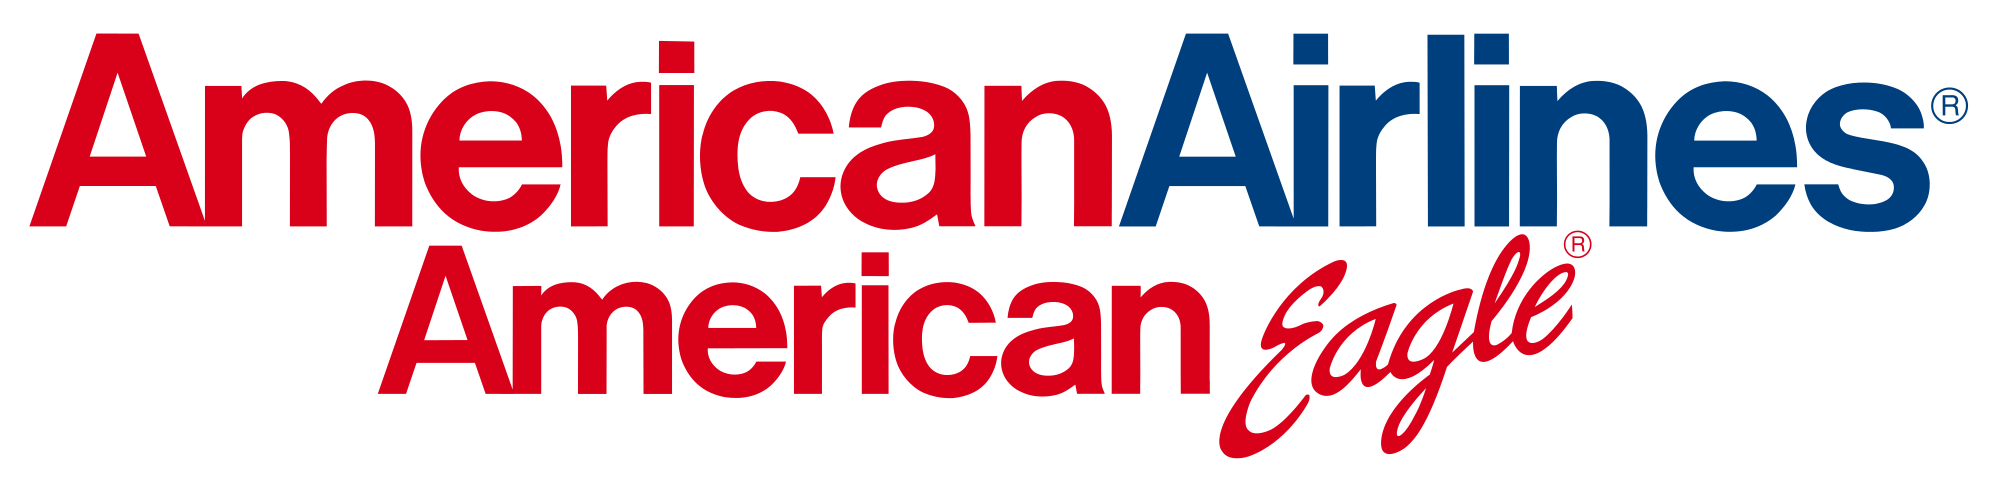 New American Eagle Logo - File:American Airlines American Eagle Logo.svg - Wikimedia Commons